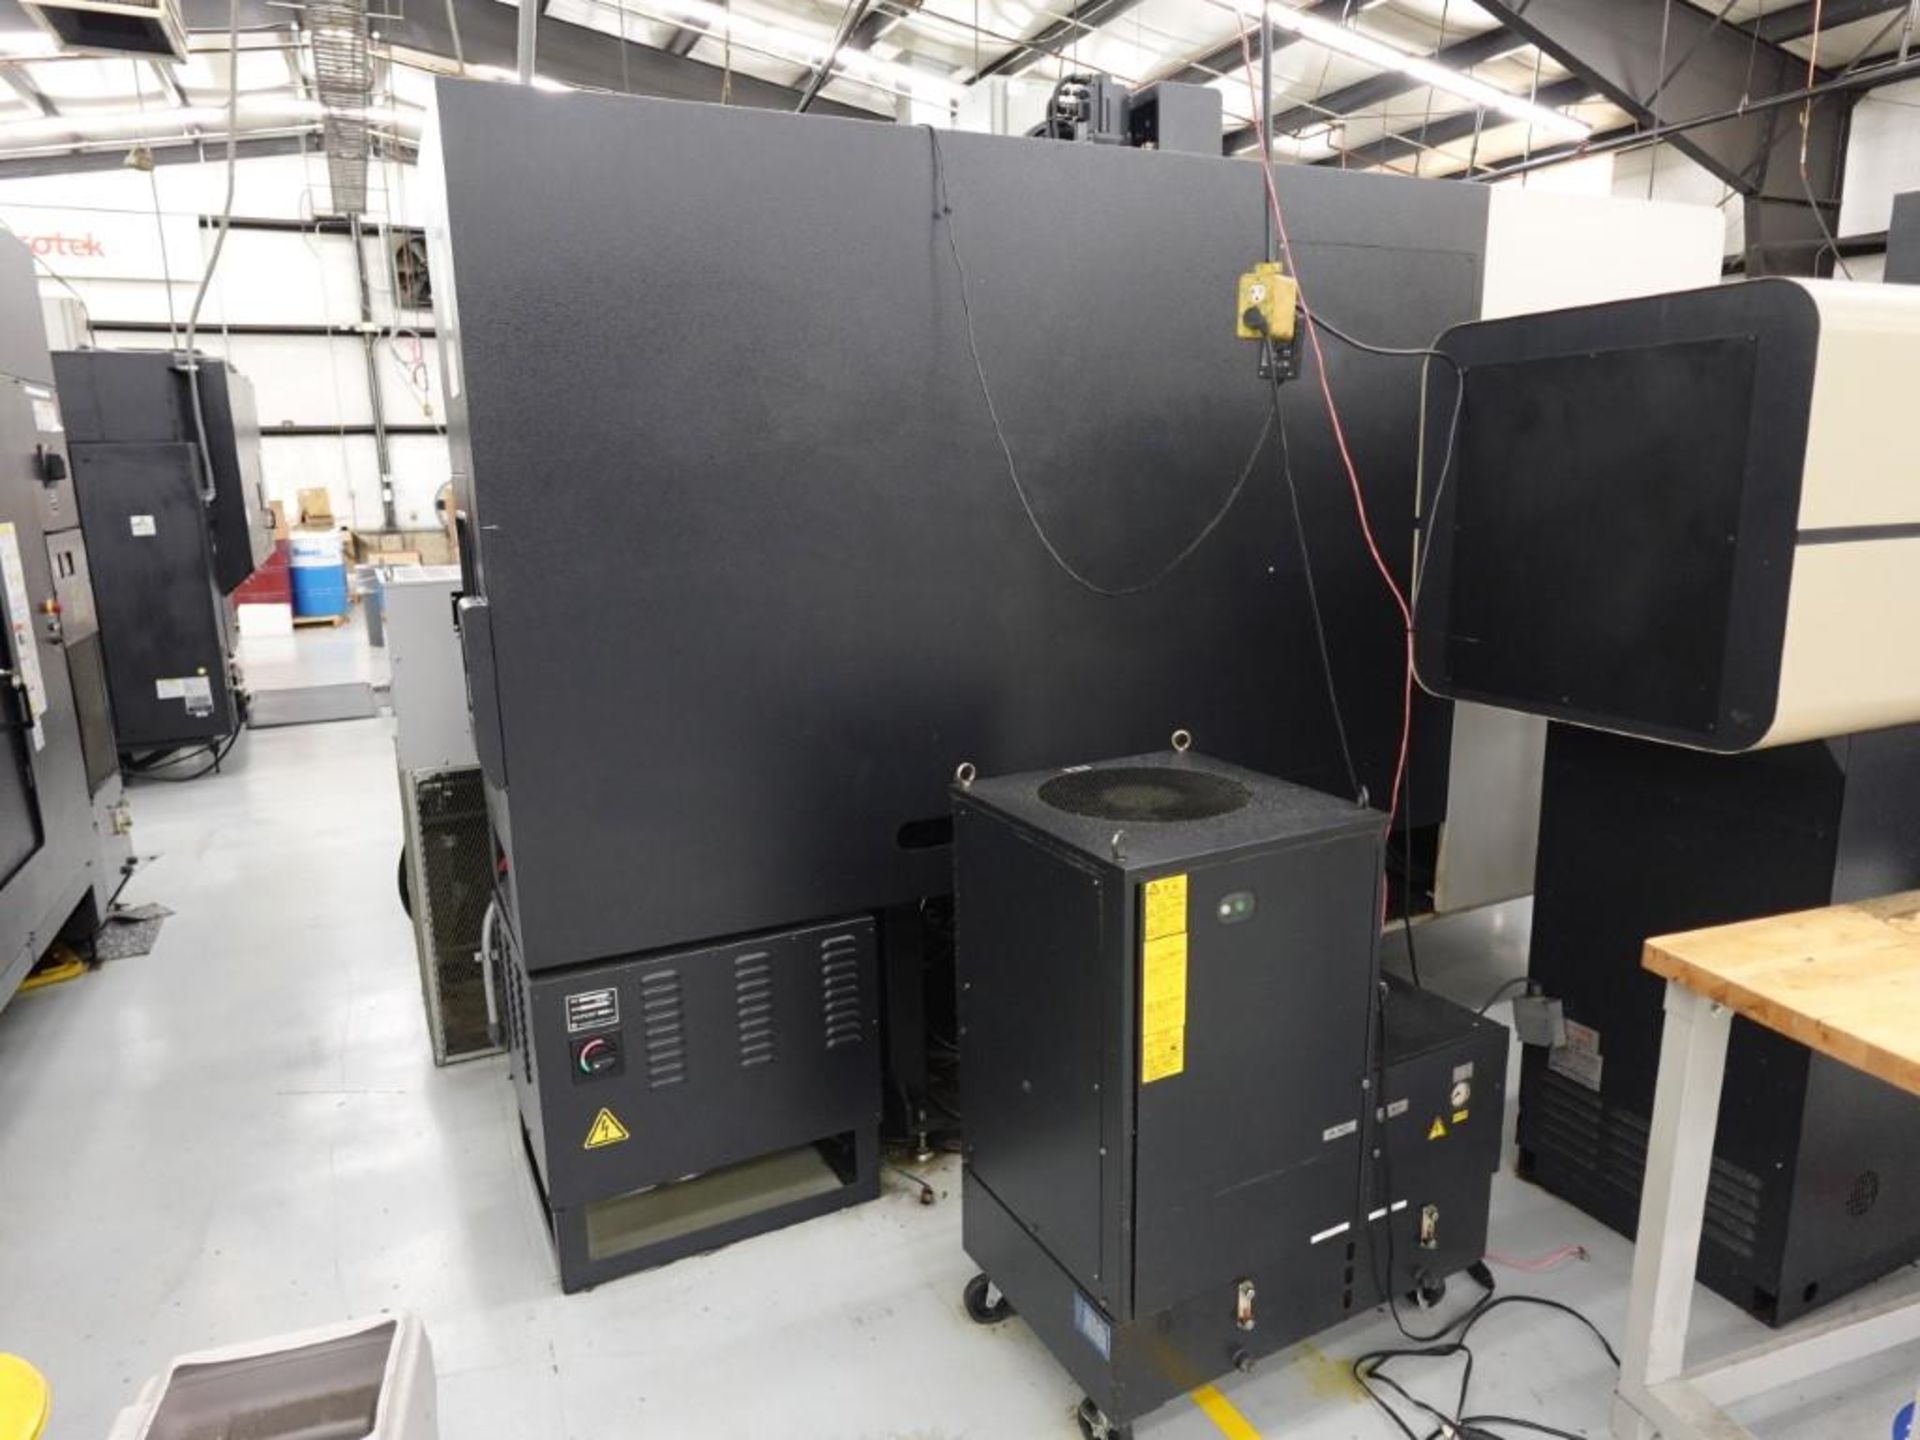 Mazak Variaxis 500-5X 5-Axis CNC Vertical Machining Center with Pallet Changer - Image 14 of 20